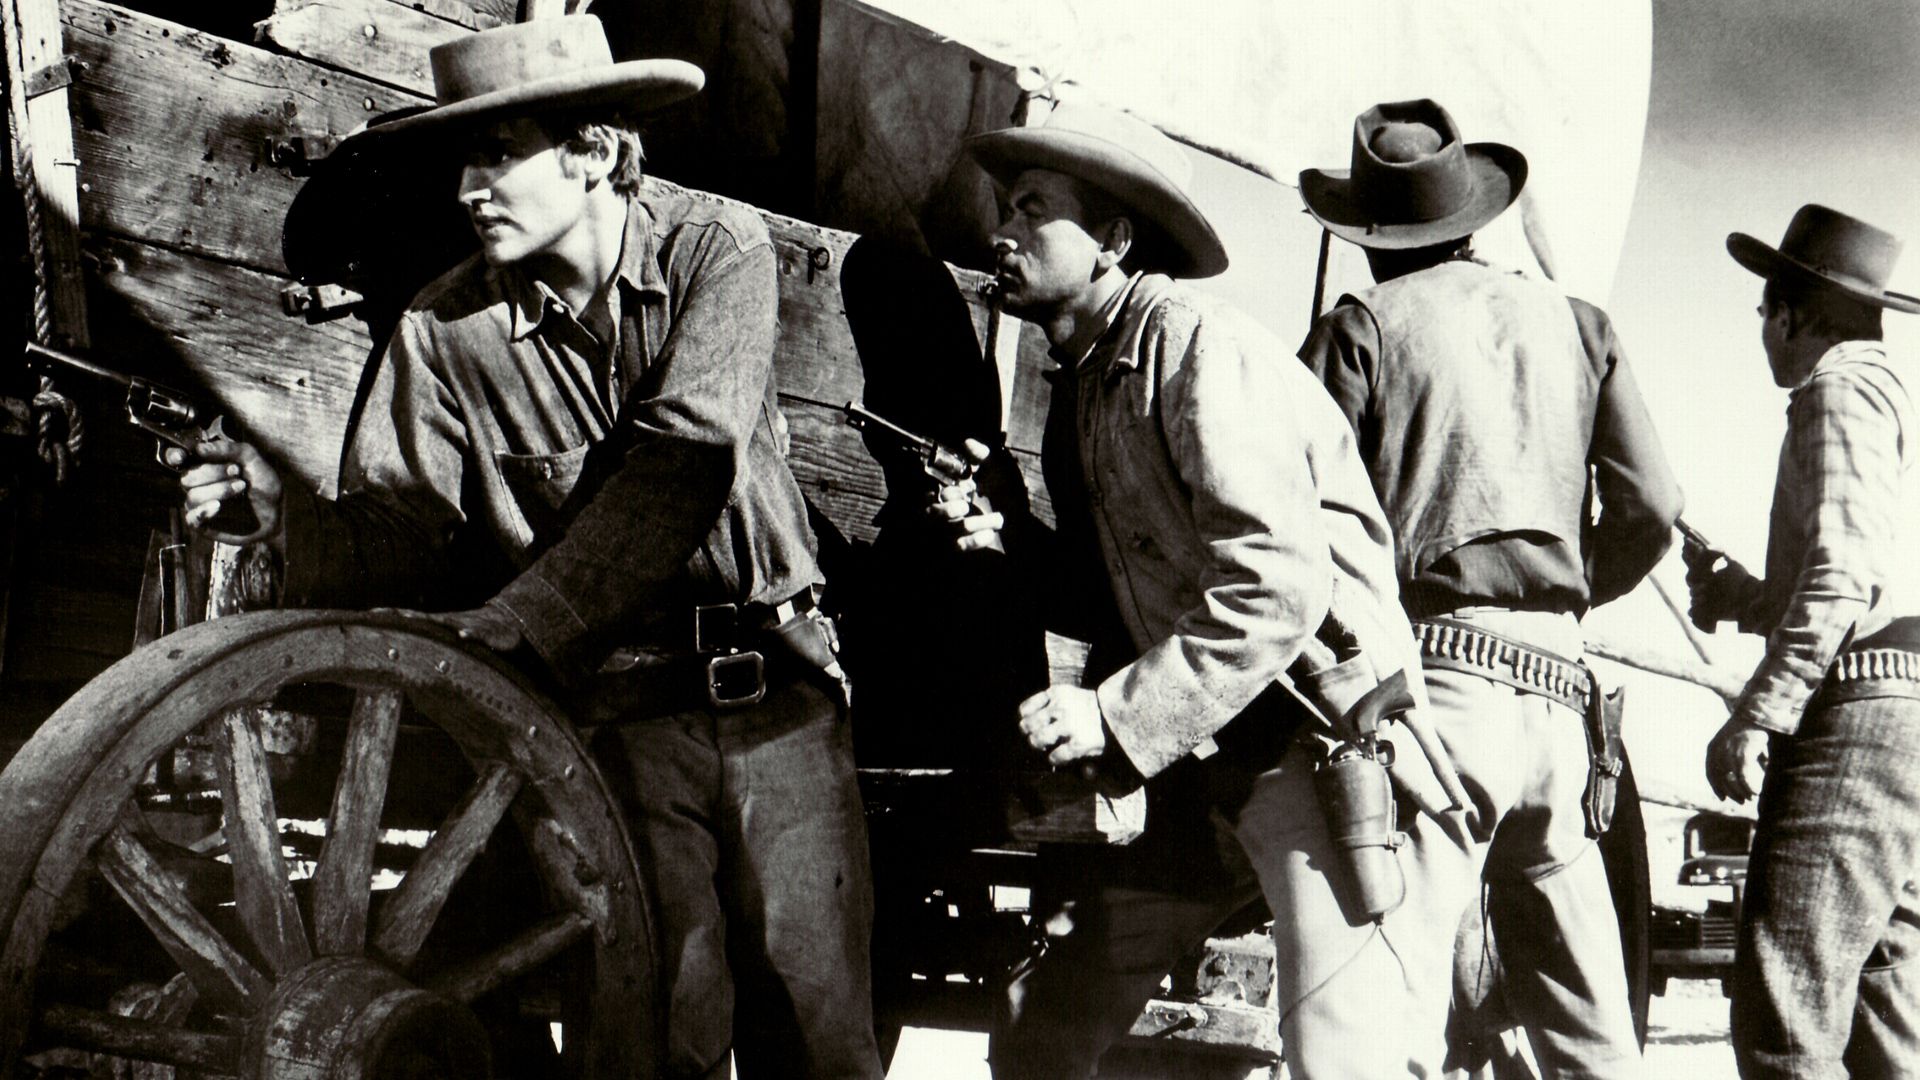 Gunfight at the O.K. Corral background